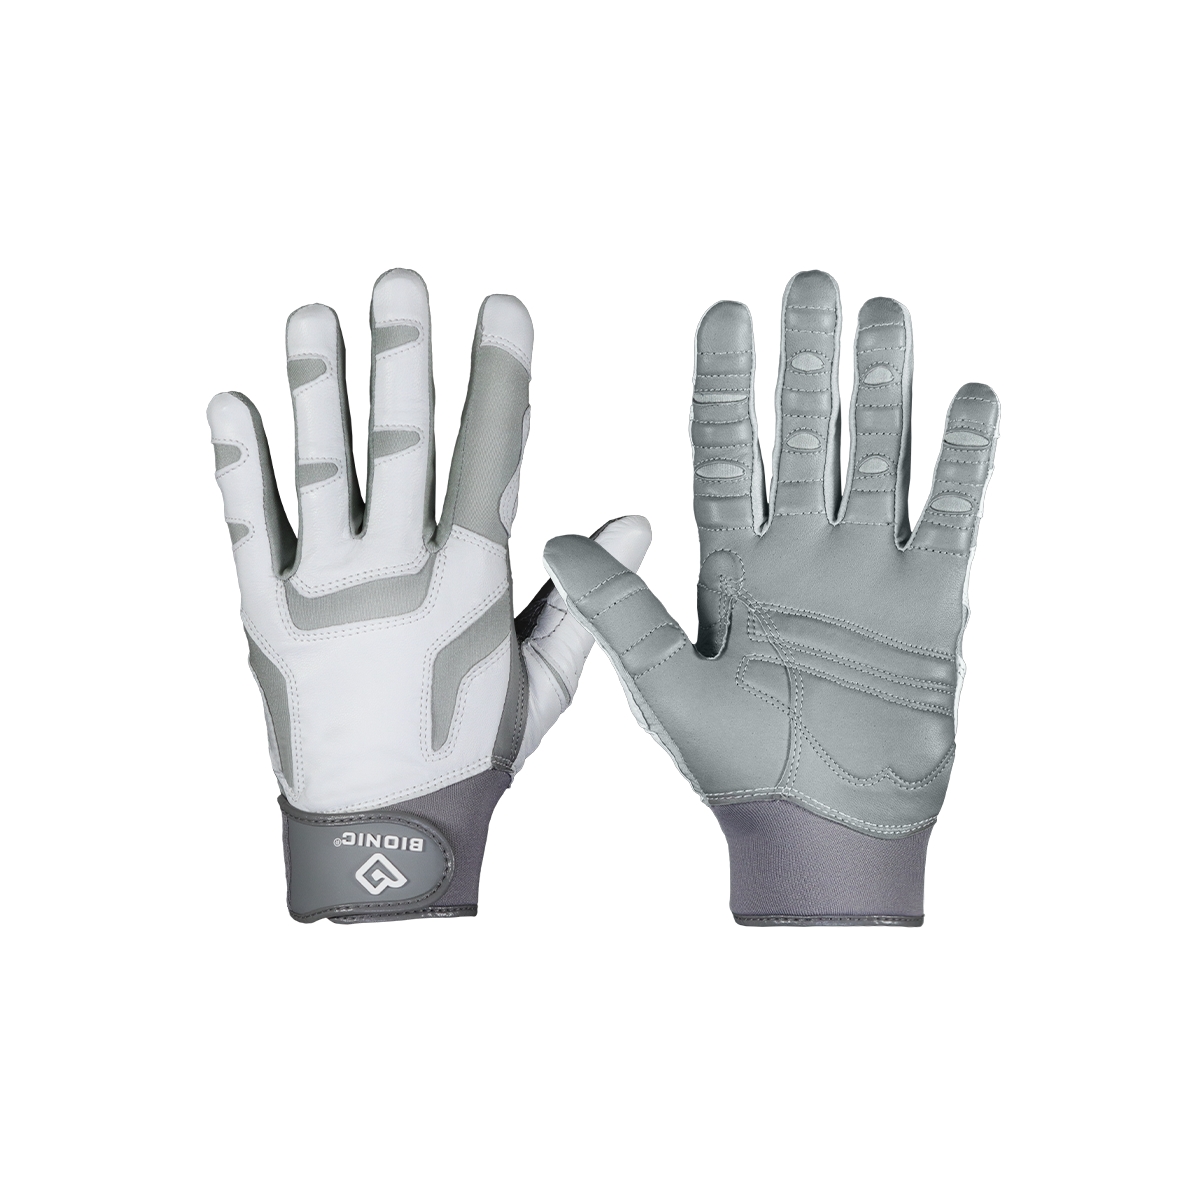 Save 31% on Women's Reliefgrip 2.0 Golf Right, X-large